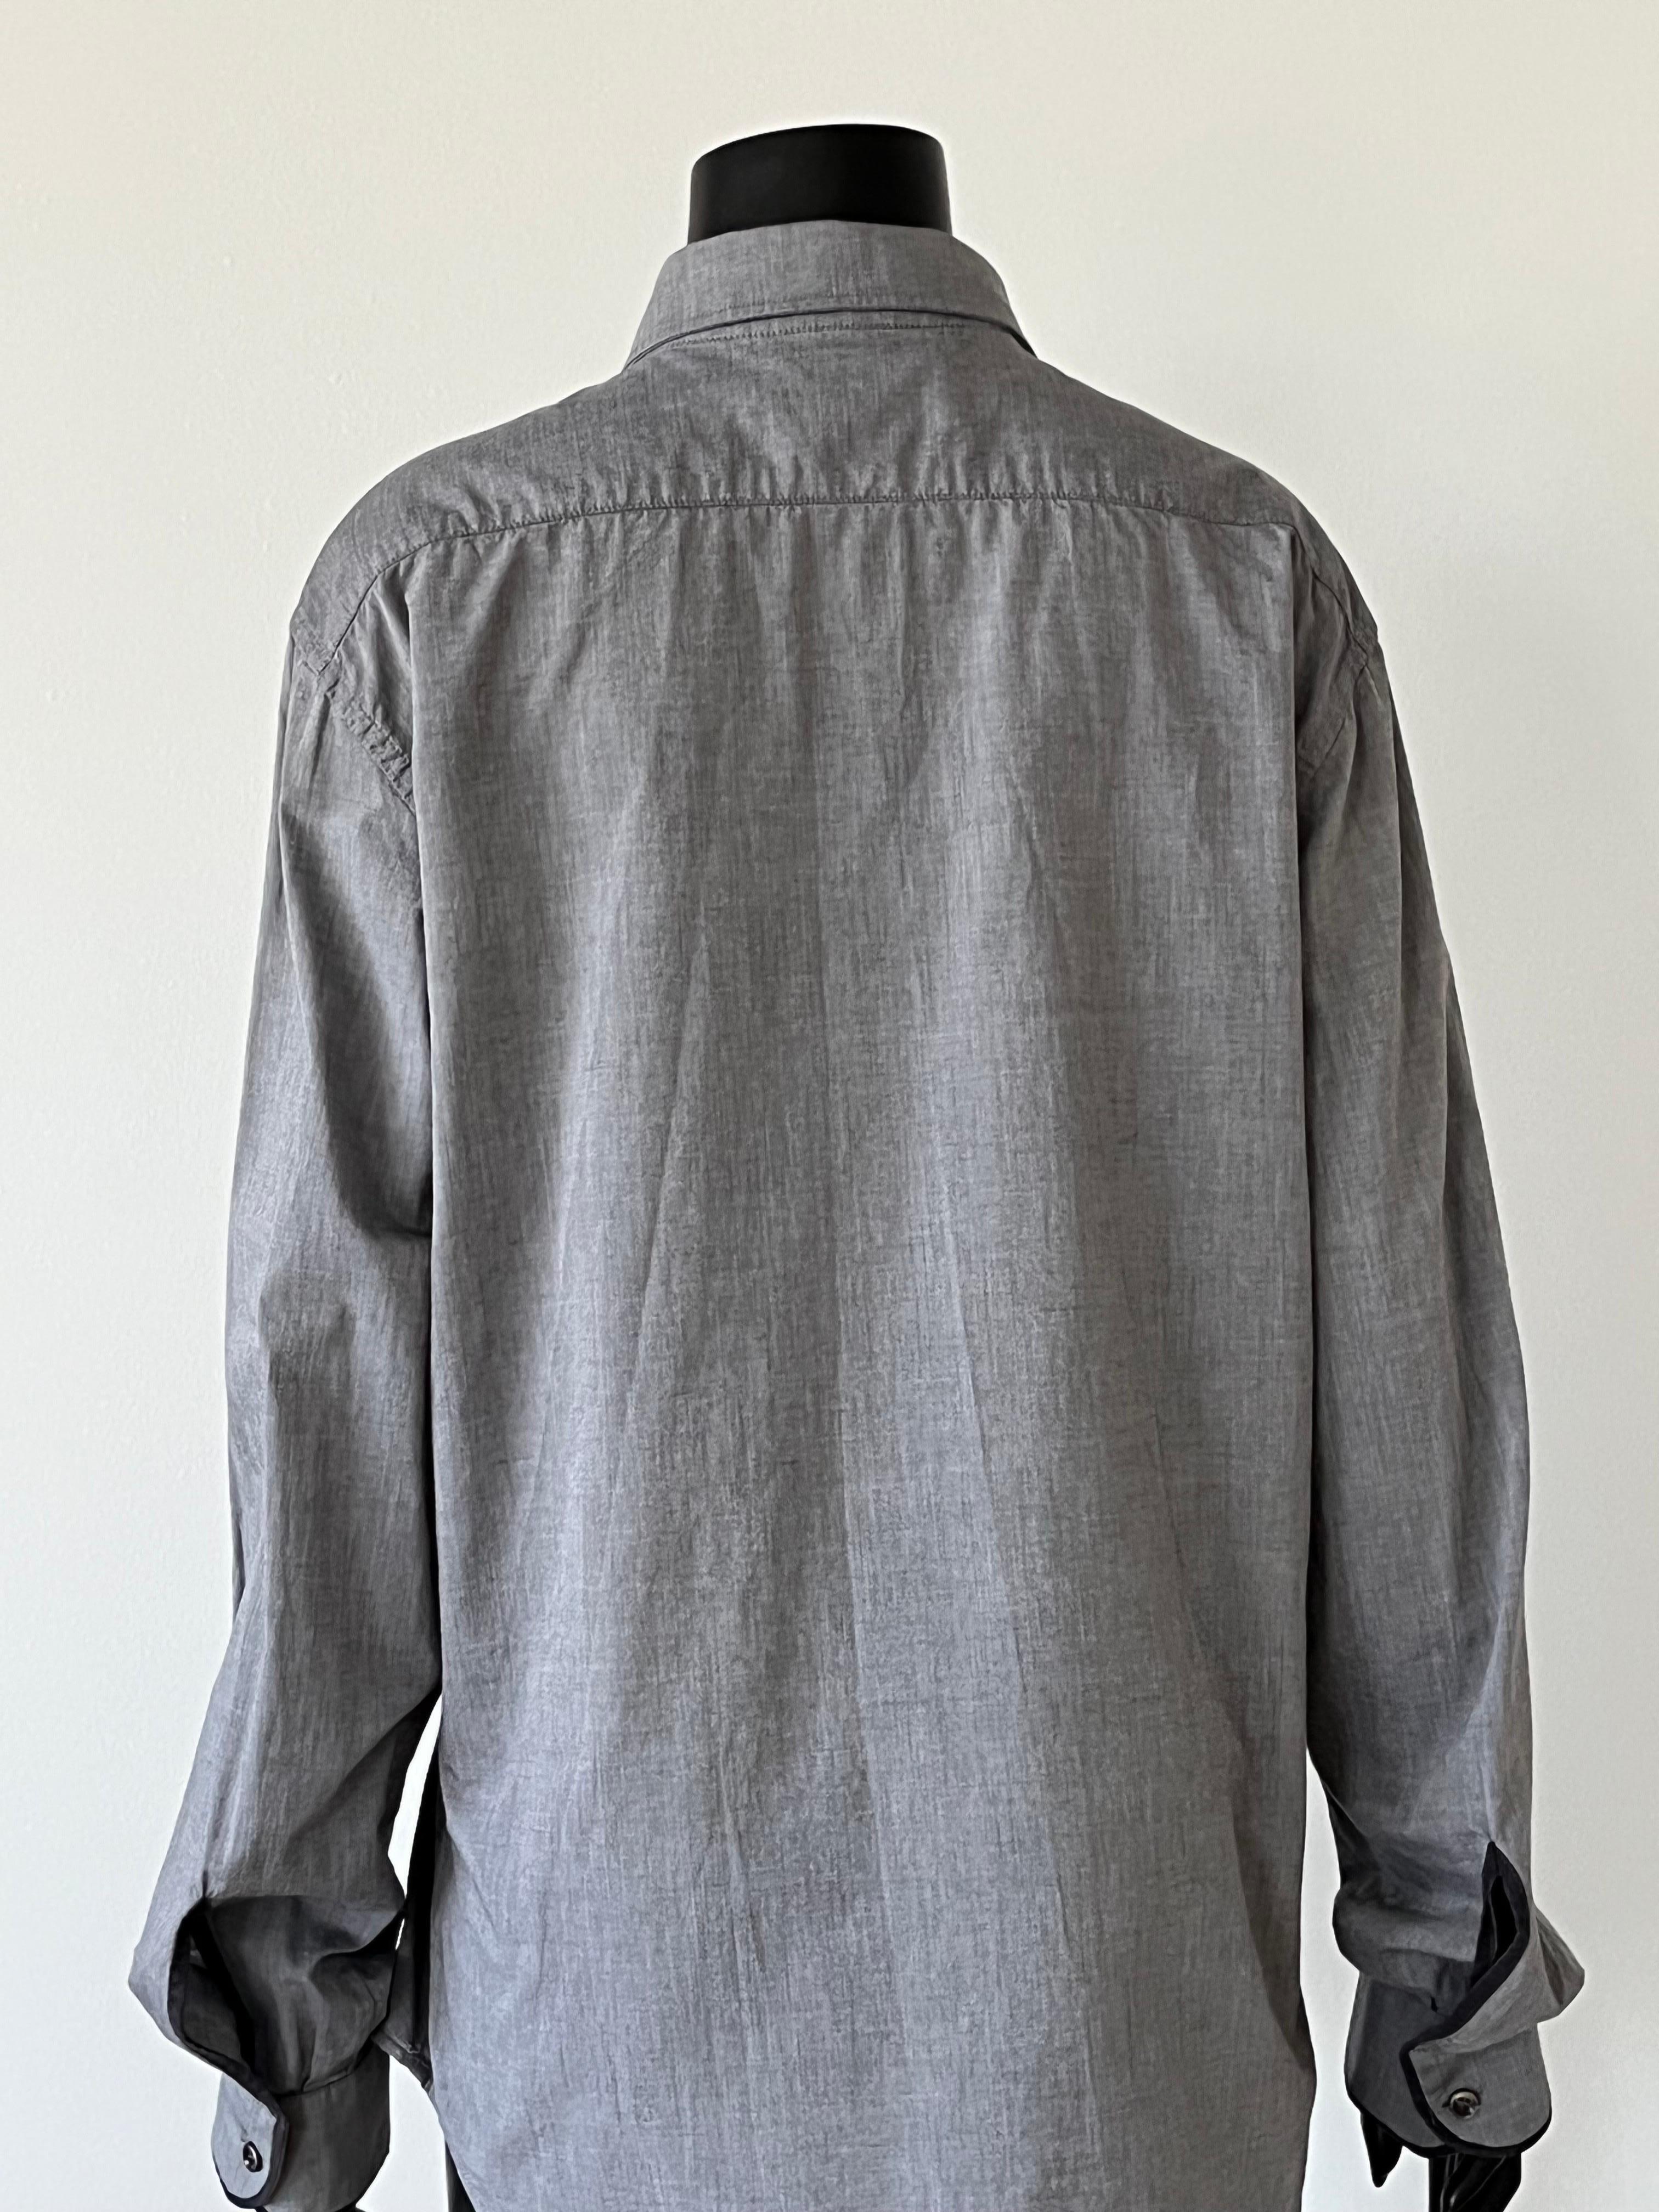 Maison Martin Margiela Shirt In Good Condition For Sale In COLLINGWOOD, AU